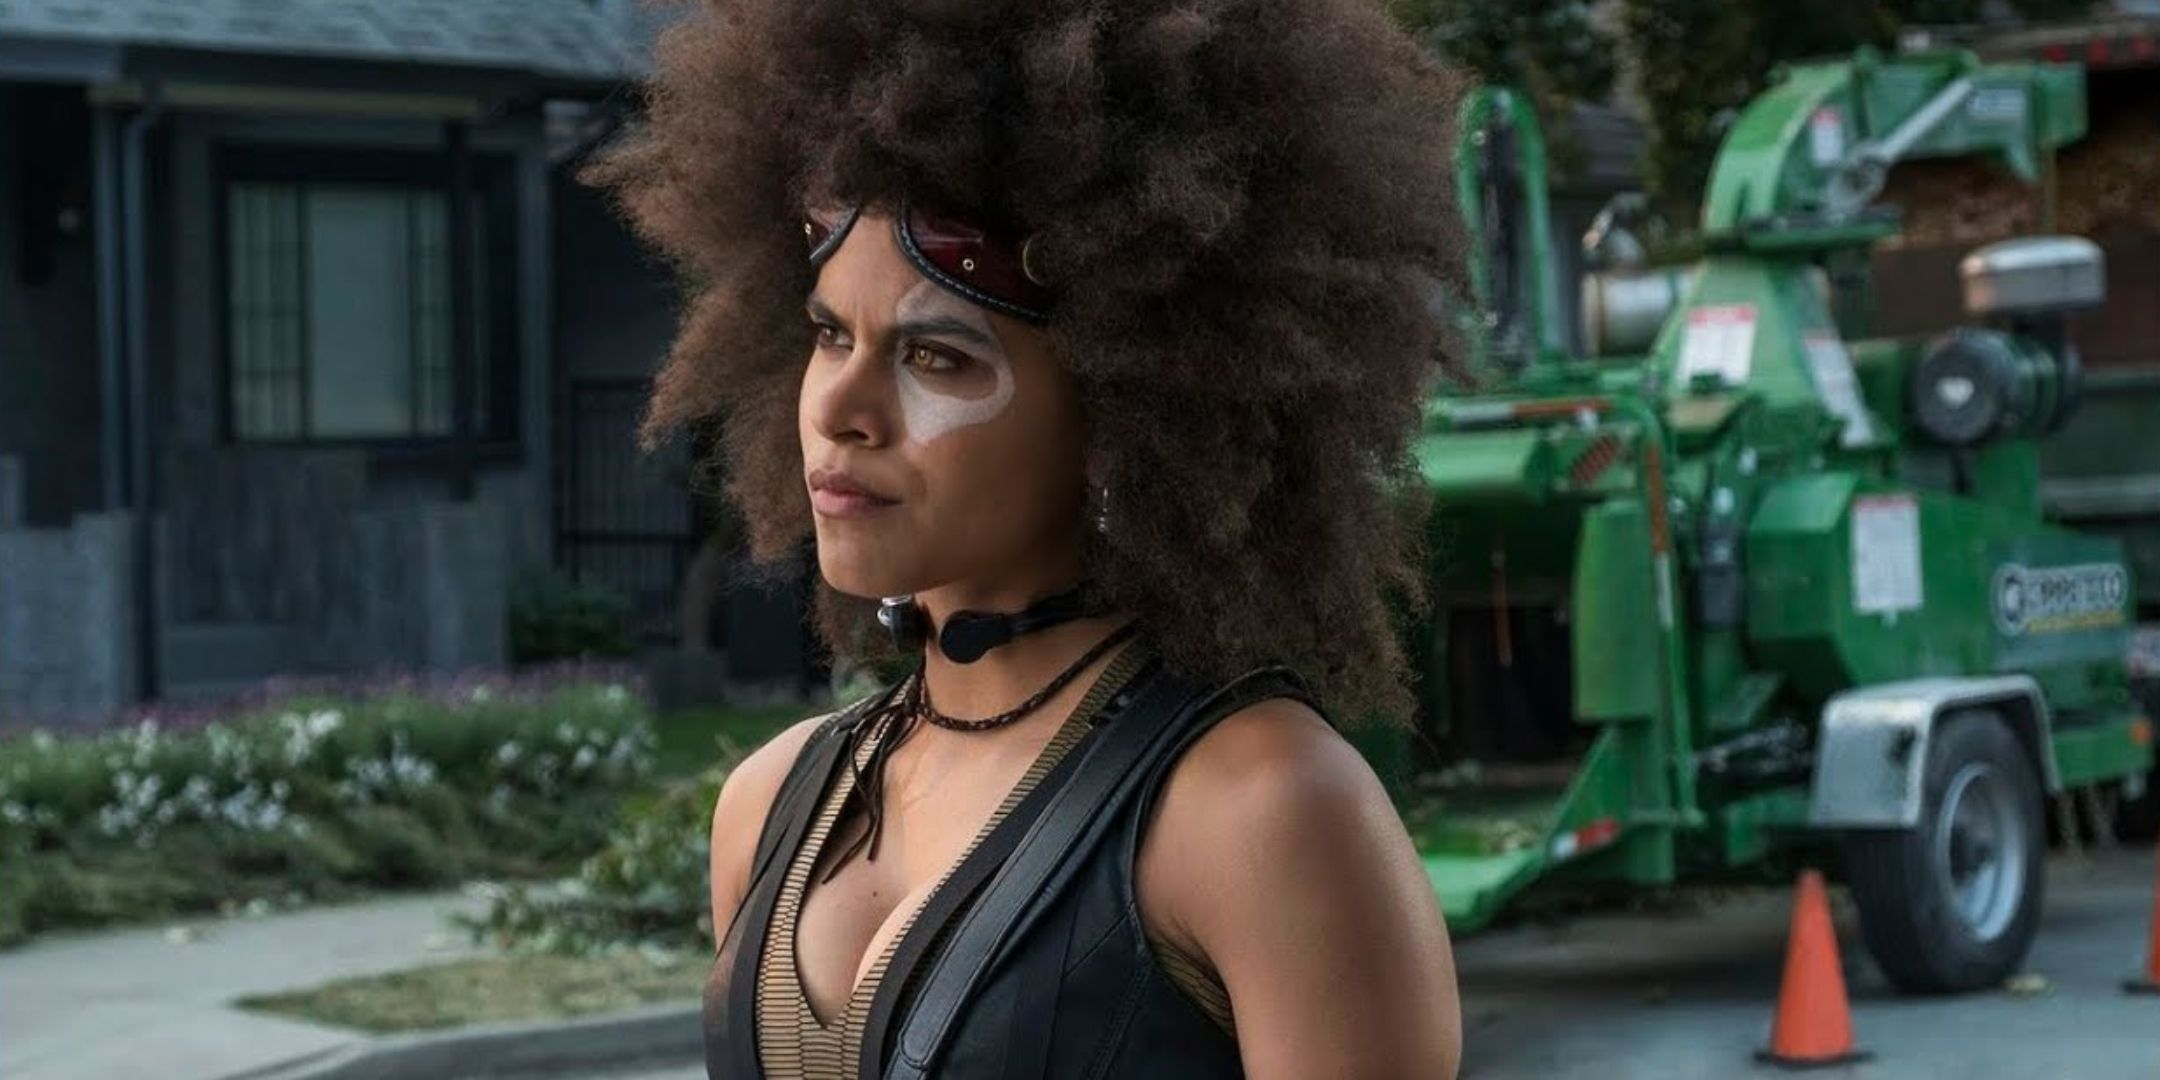 Deadpool 2 Shot Of Domino Looking Off-Screen To The Left